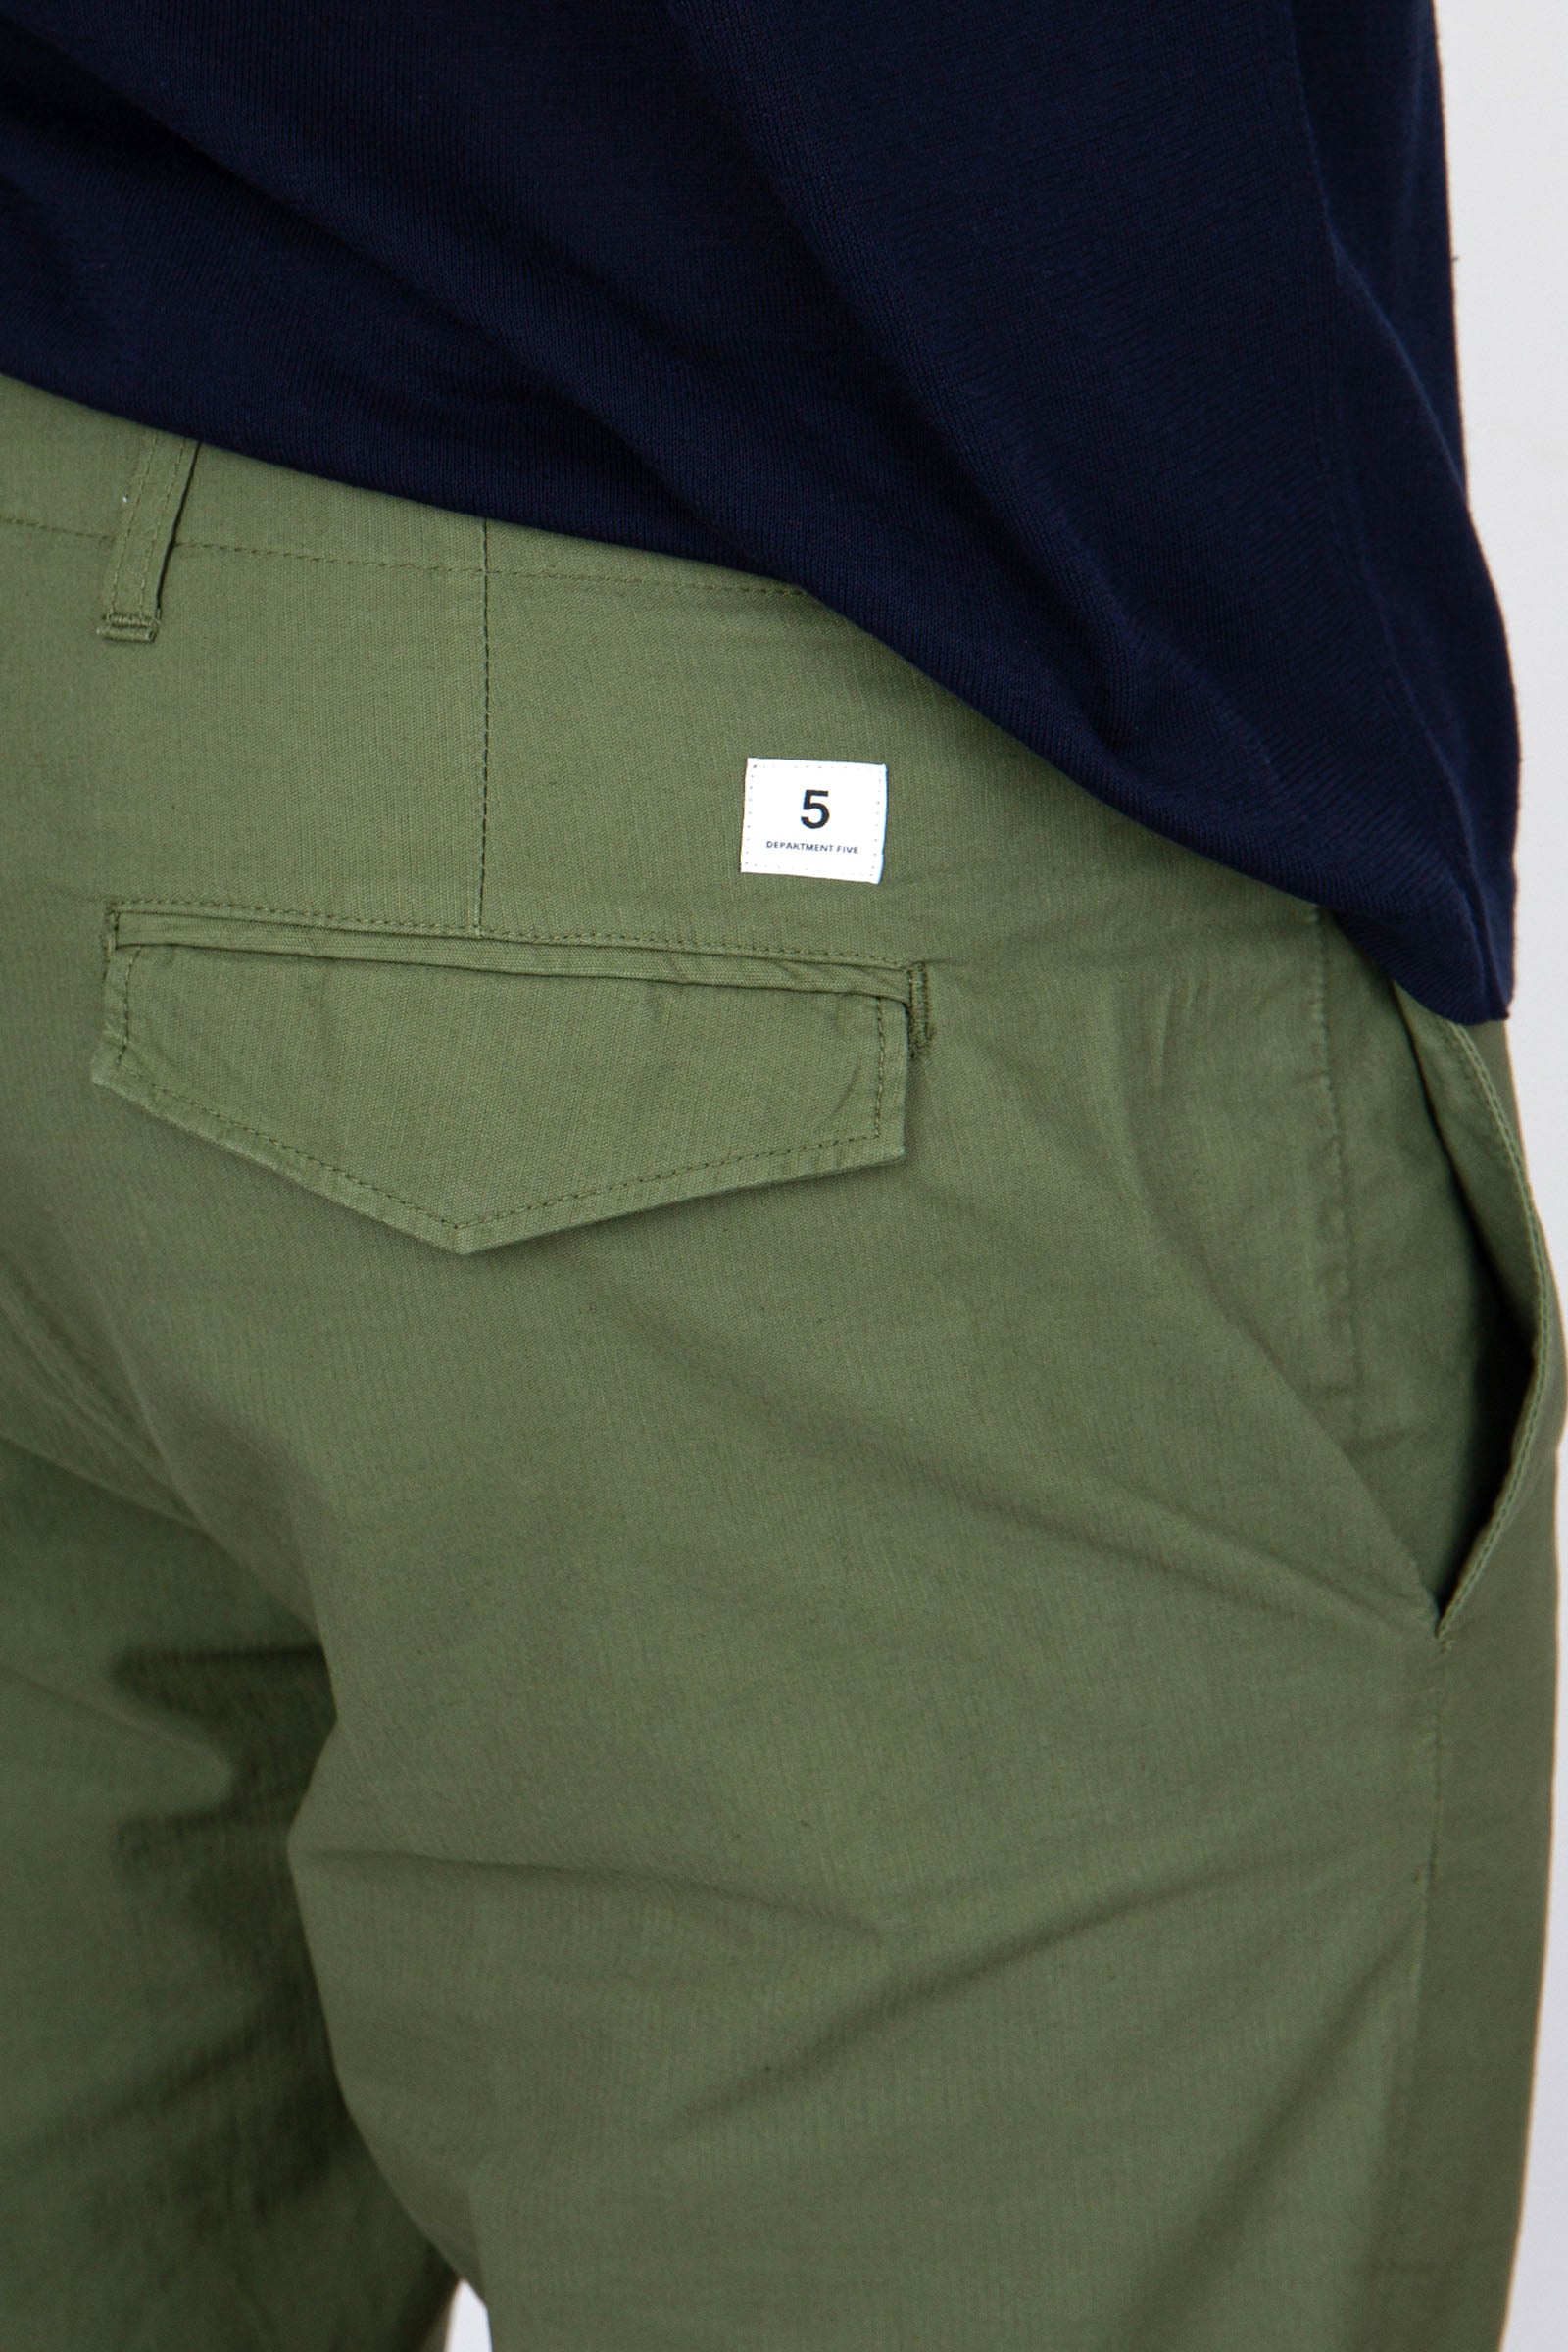 Department Five Green Military Cotton Trousers - 2